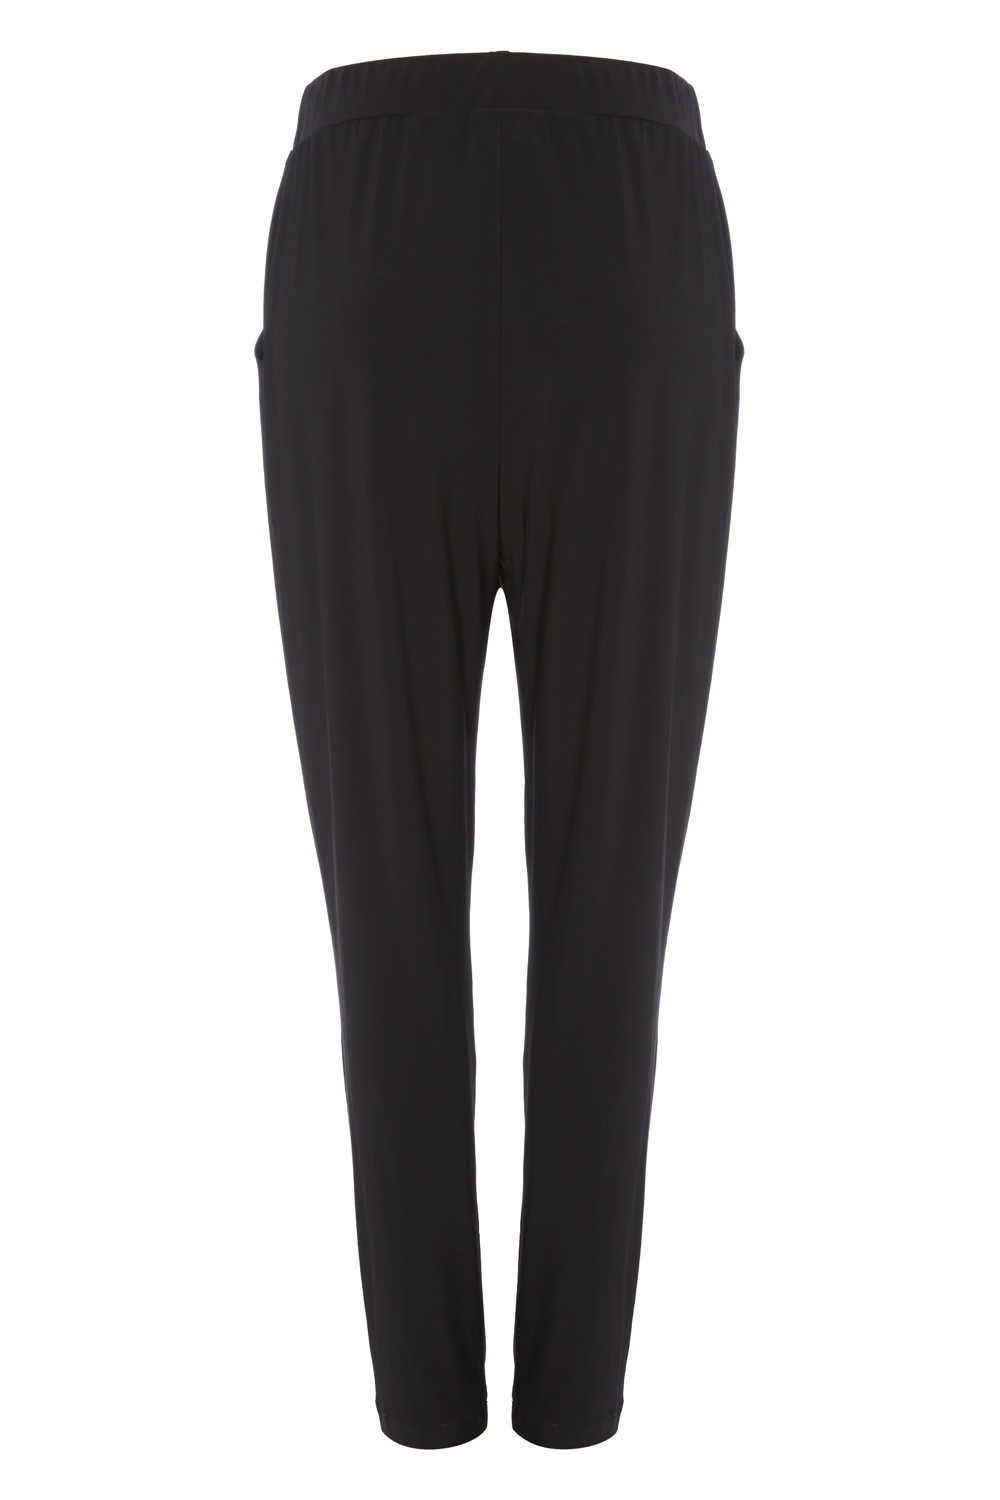 Black Jersey Harem Trousers, Image 4 of 5